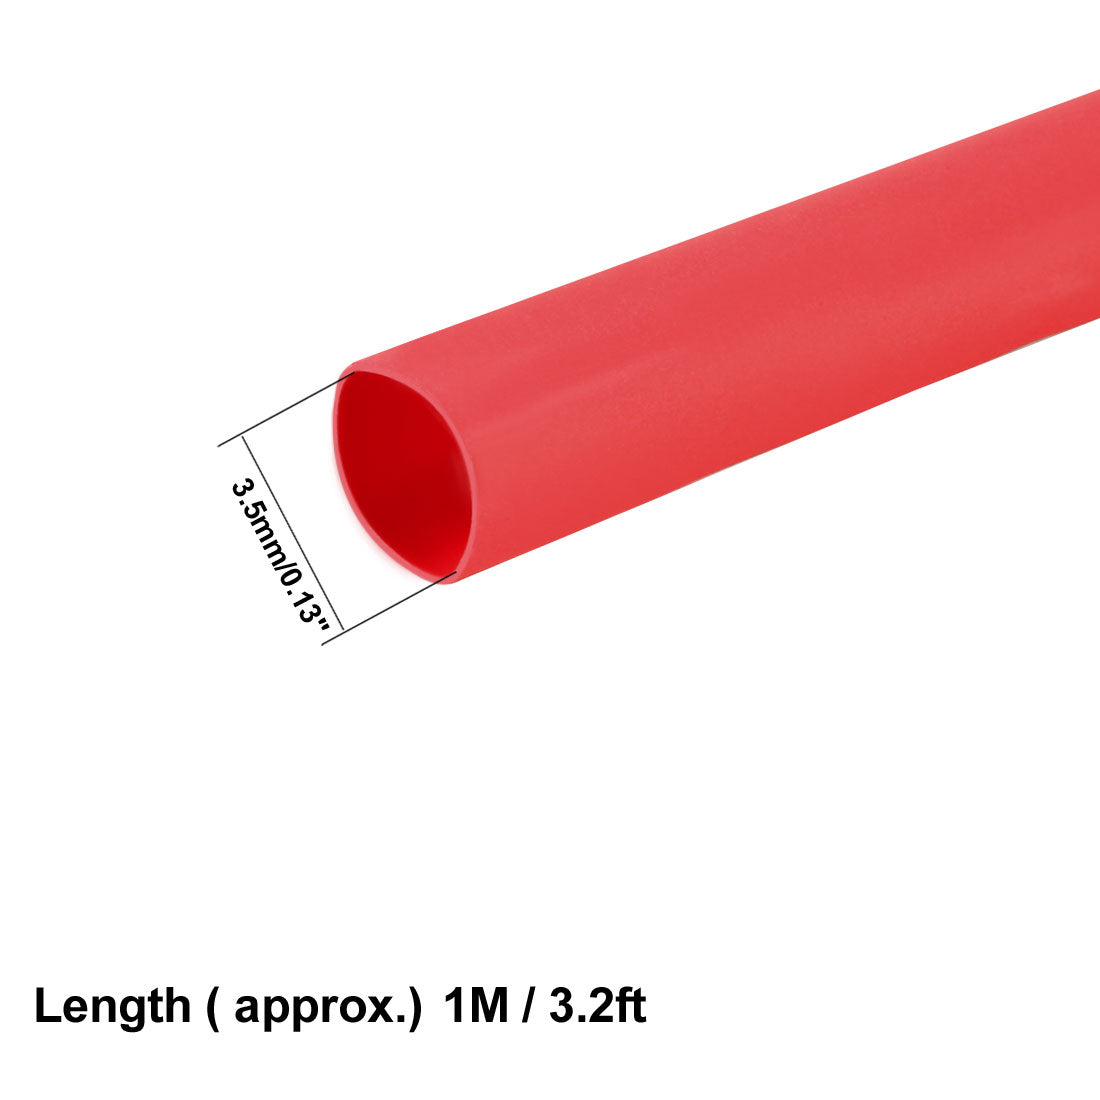 uxcell Uxcell Heat Shrink Tube 2:1 Electrical Insulation Tube Wire Cable Tubing Sleeving Wrap Red 3.5mm Diameter 1m Long